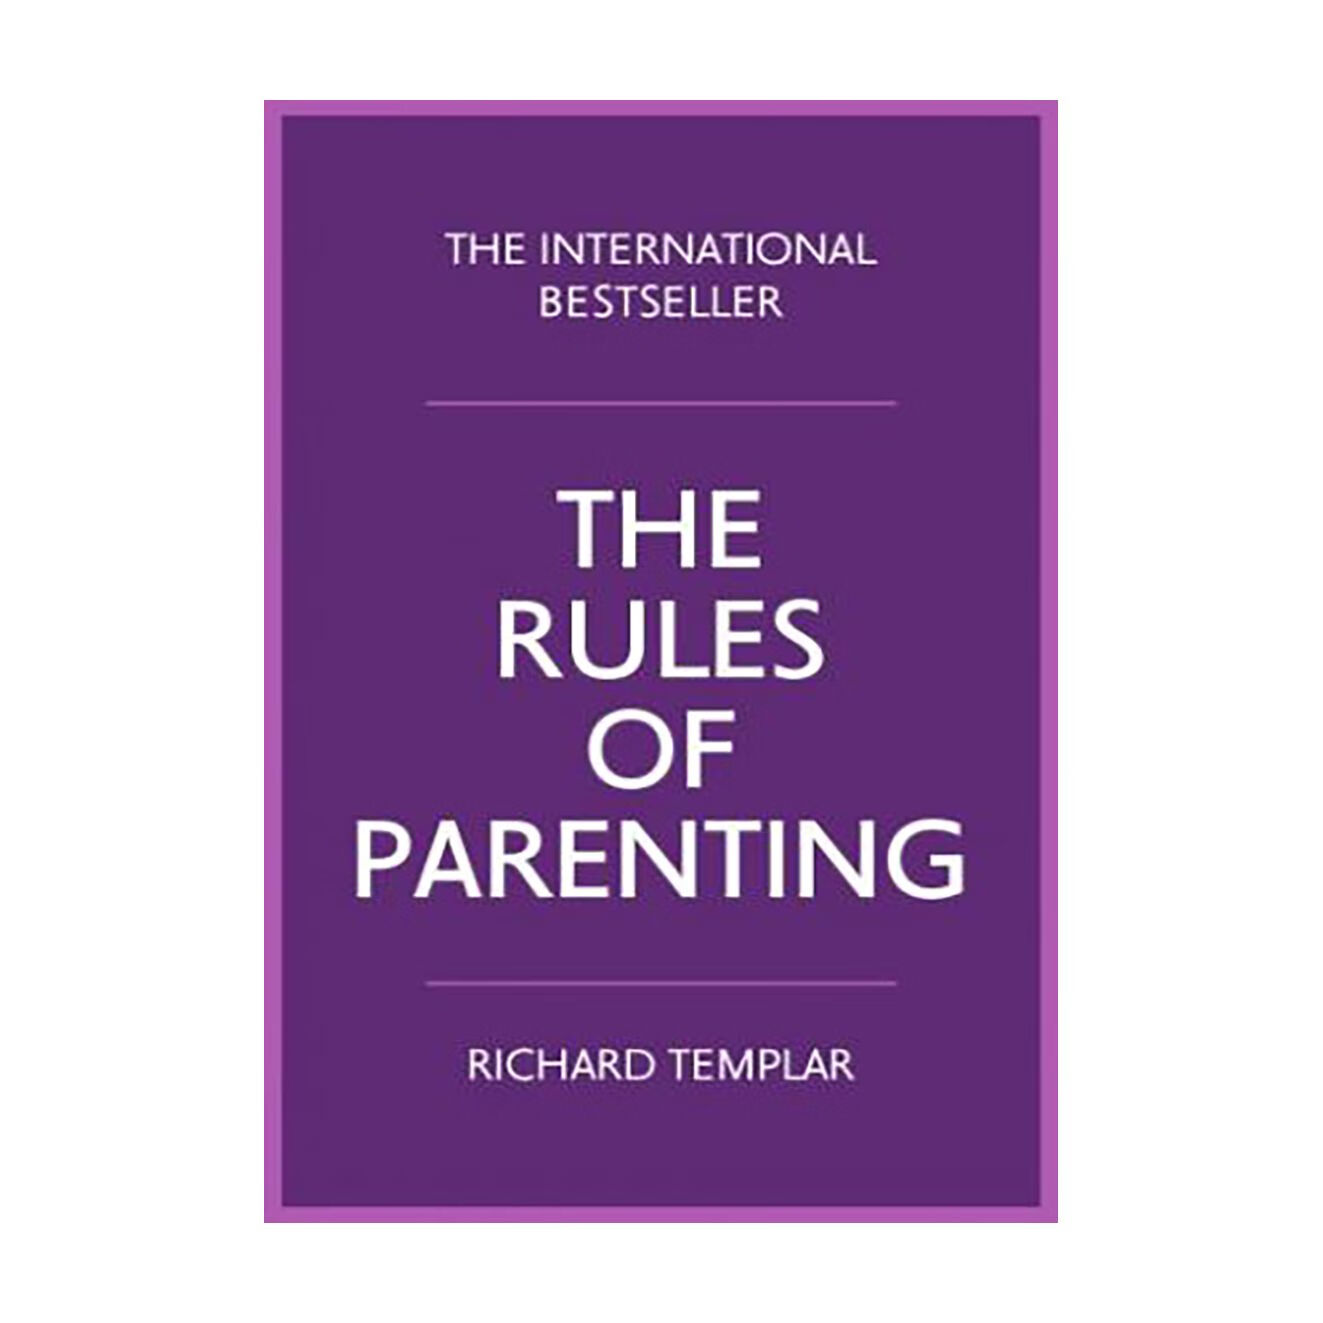 The rules of parenting